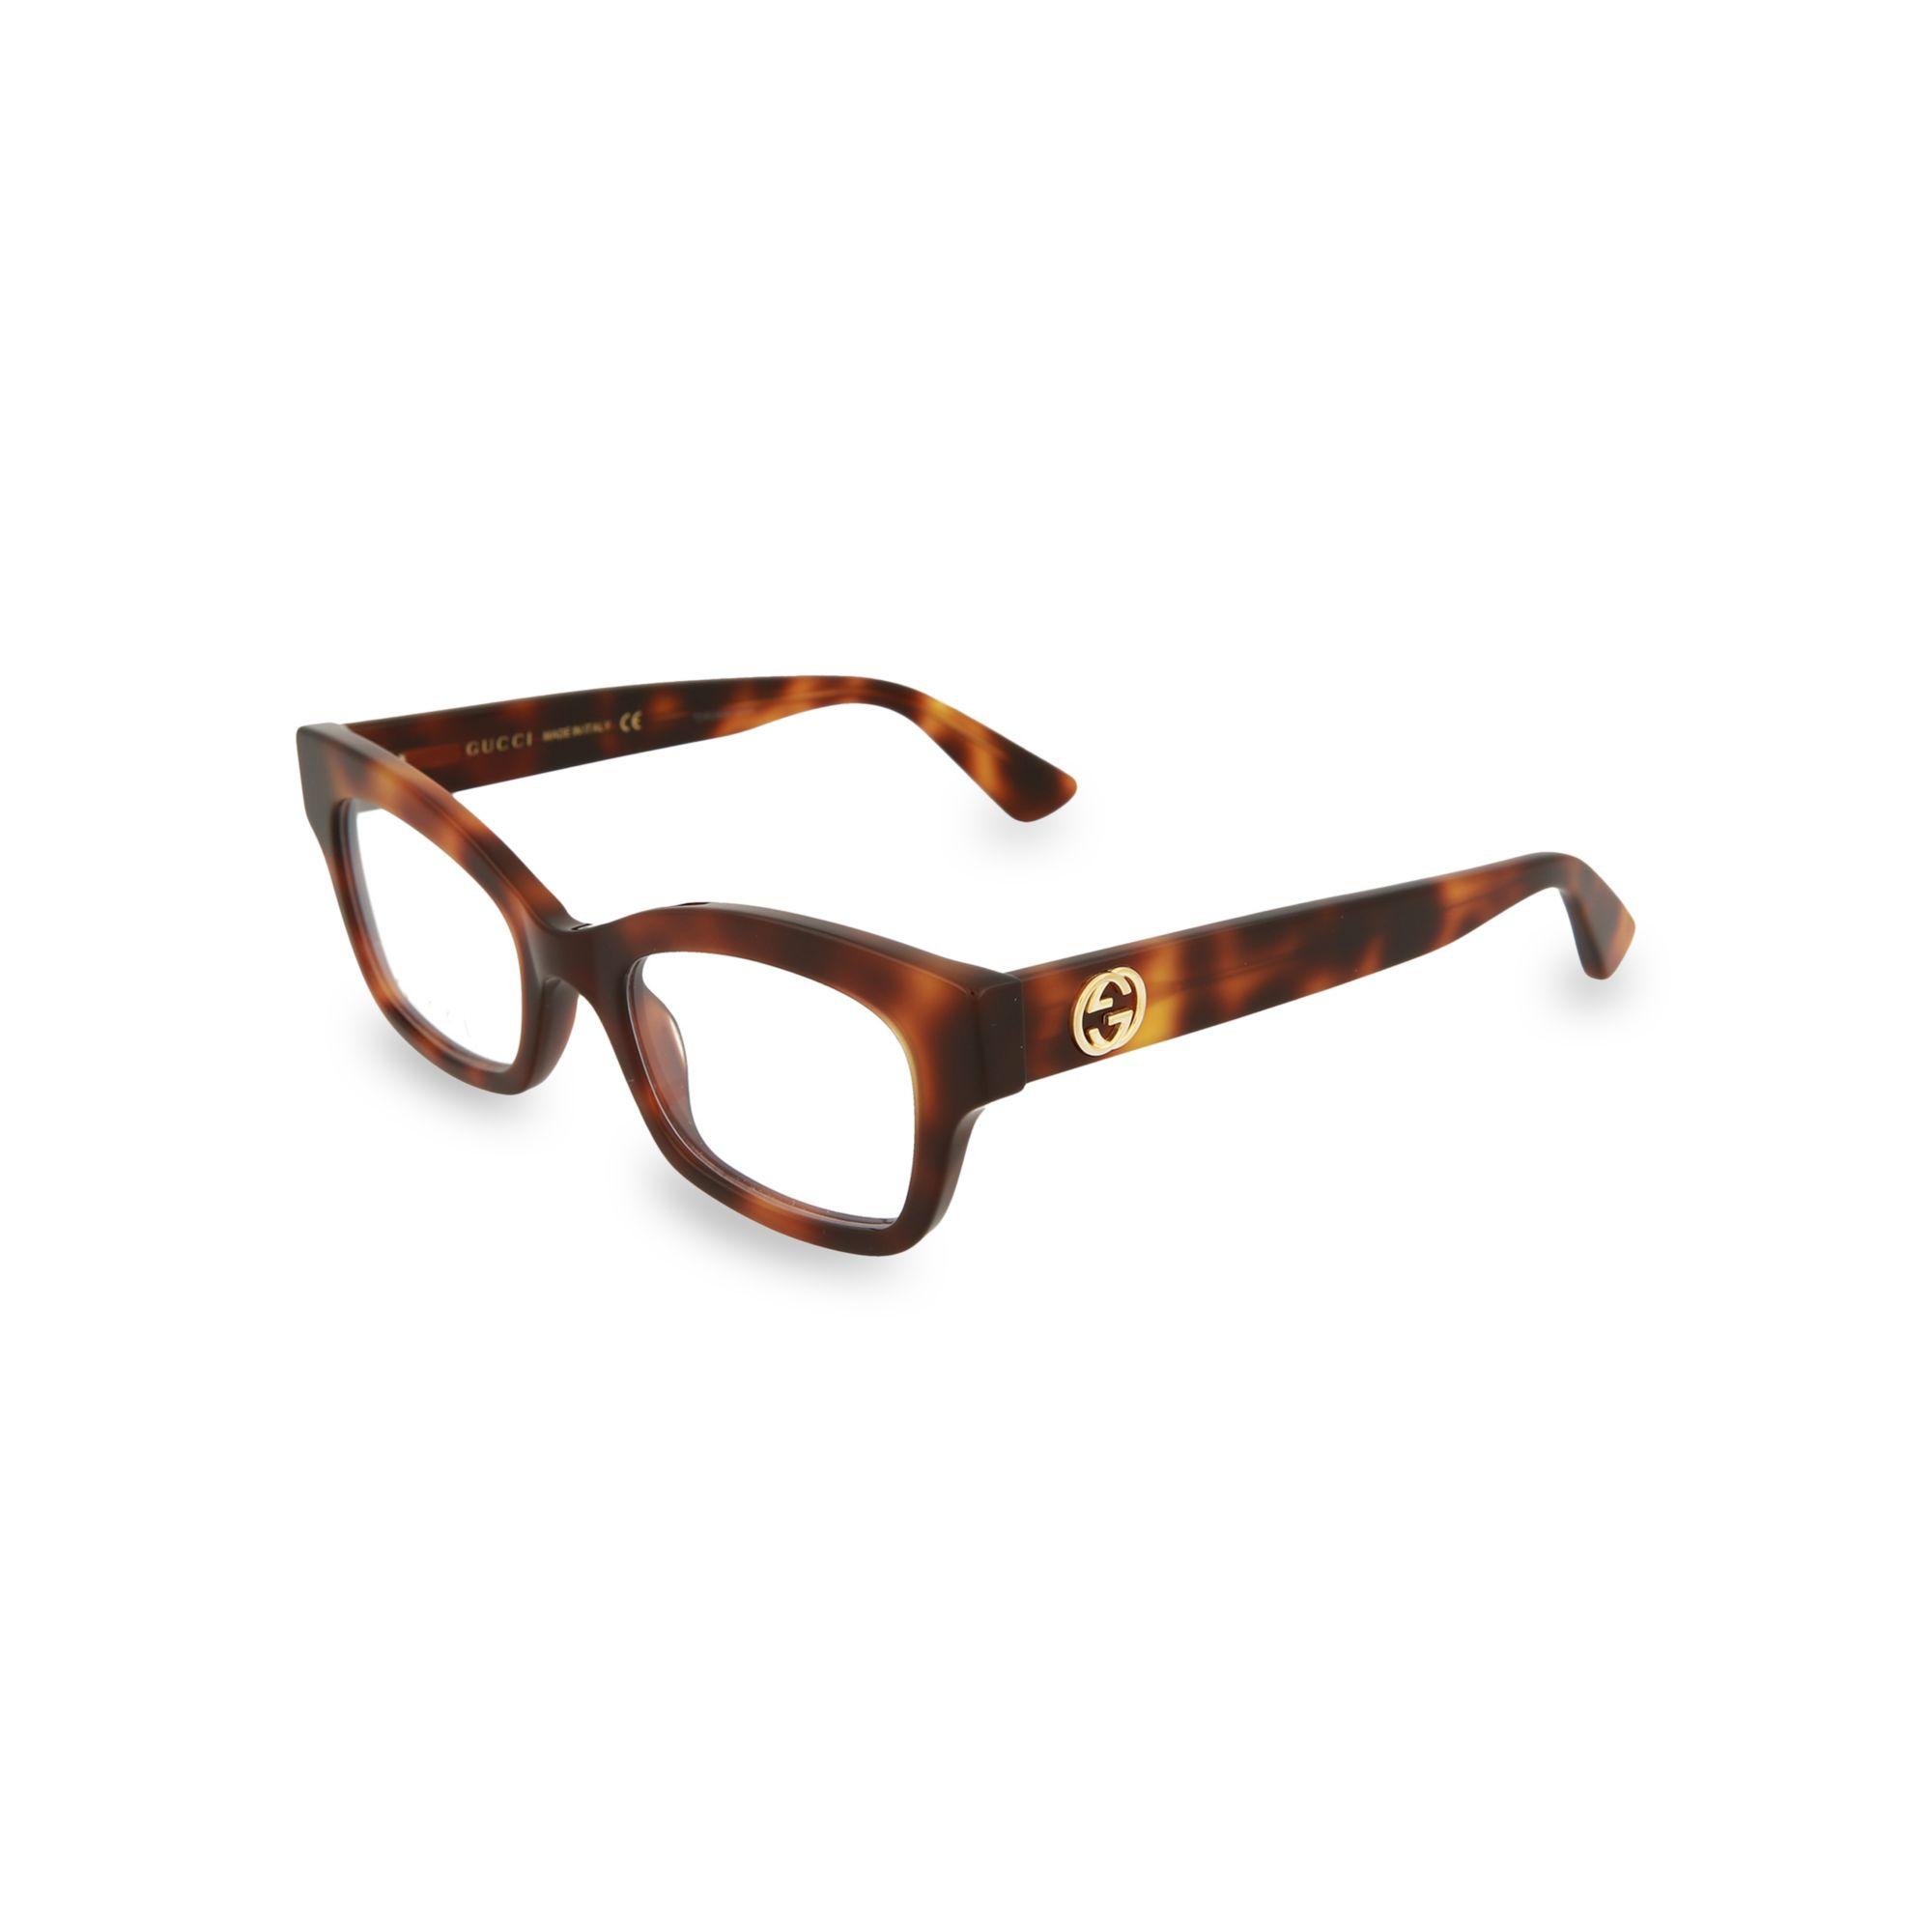 Gucci 48mm Rectangular Blue Light Blocking Reading Glasses in Brown | Lyst